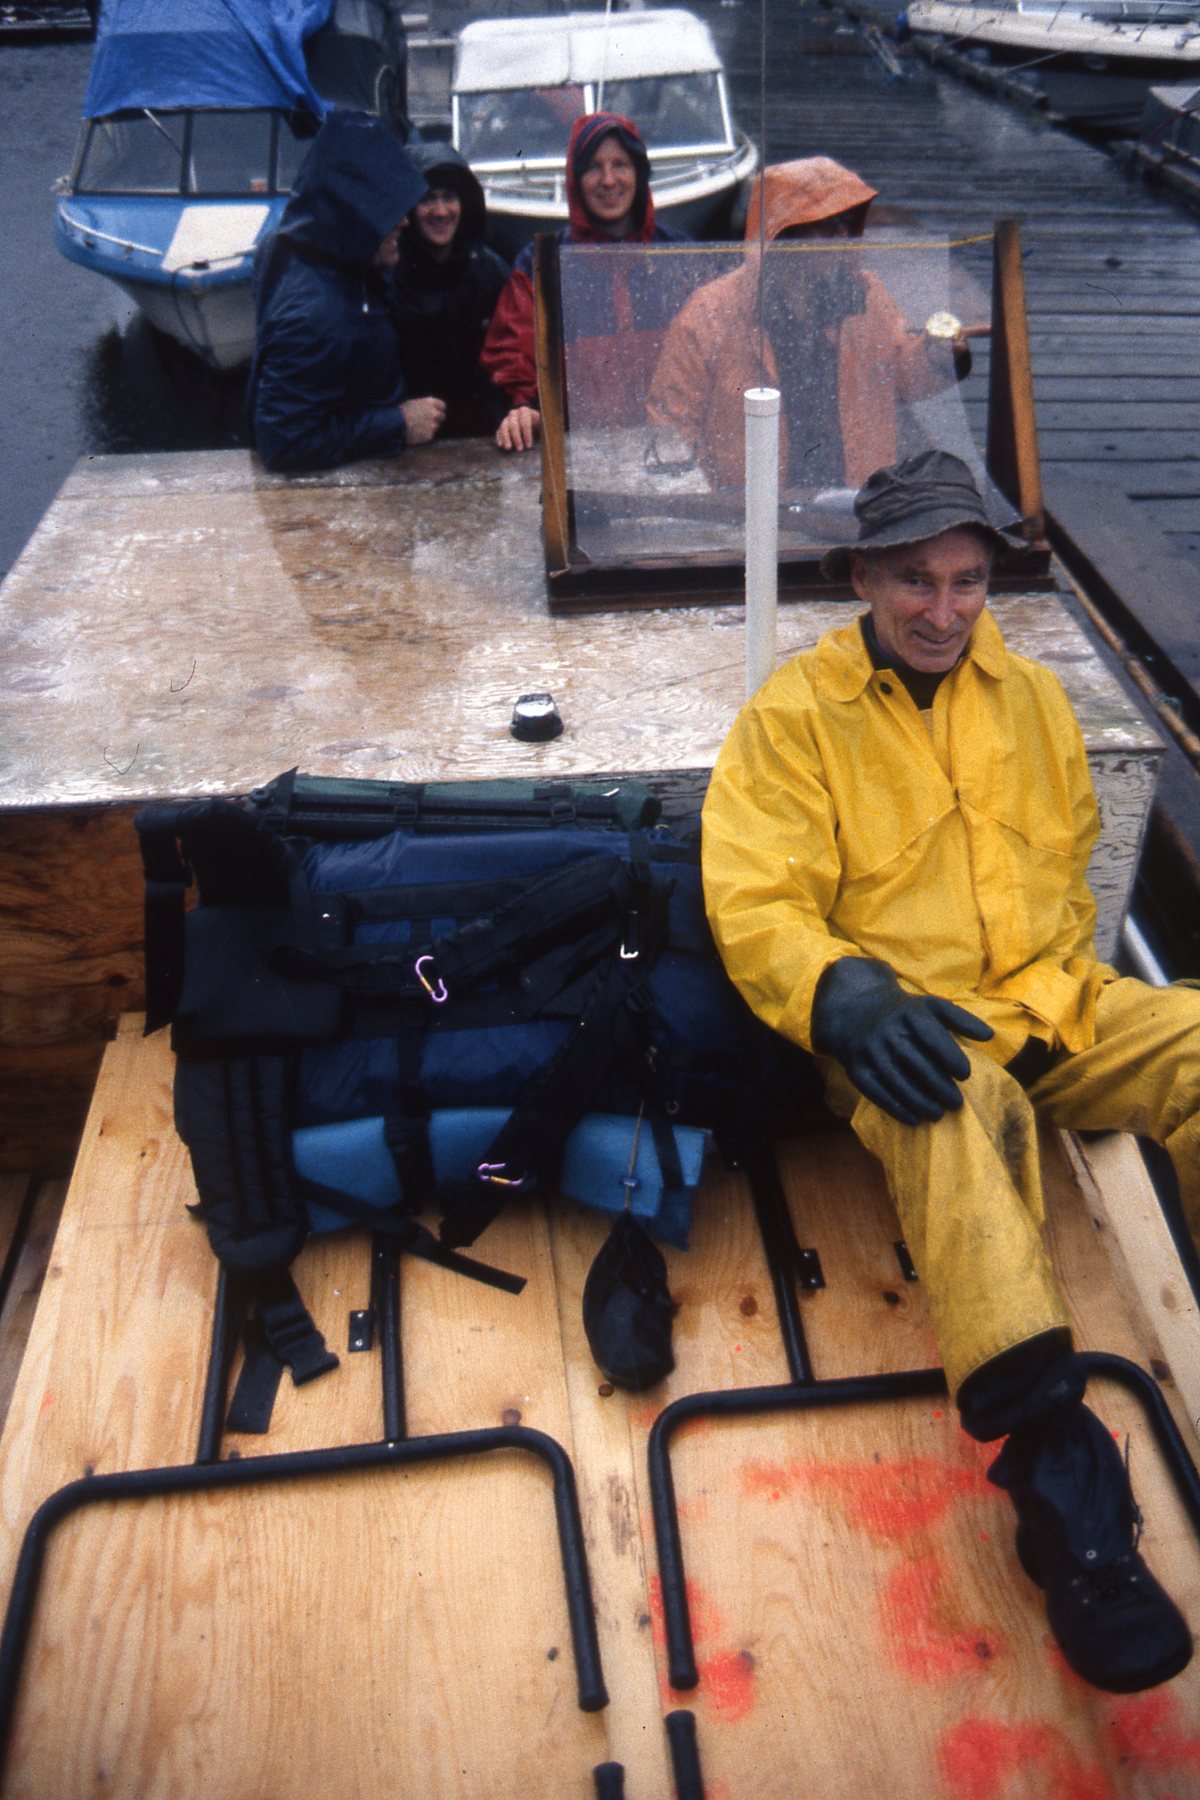 Don Gillespie in a yellow rainsuit on the front of a boat tied to a dock. The captain and a few other people and boats are in the background.